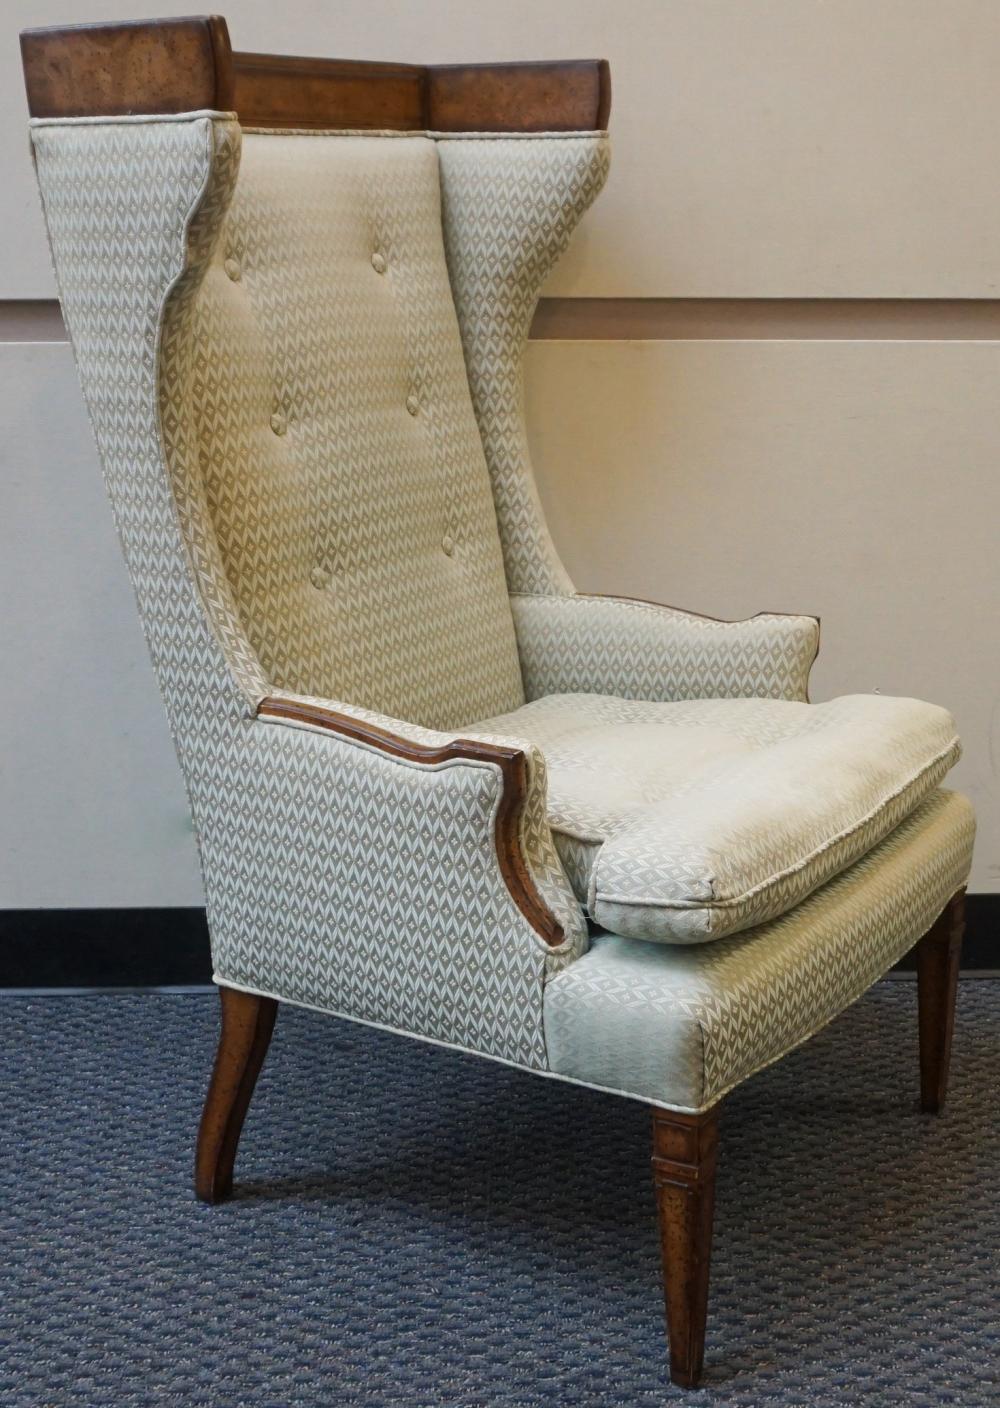 PROVINCIAL STYLE FRUITWOOD UPHOLSTERED 32adea